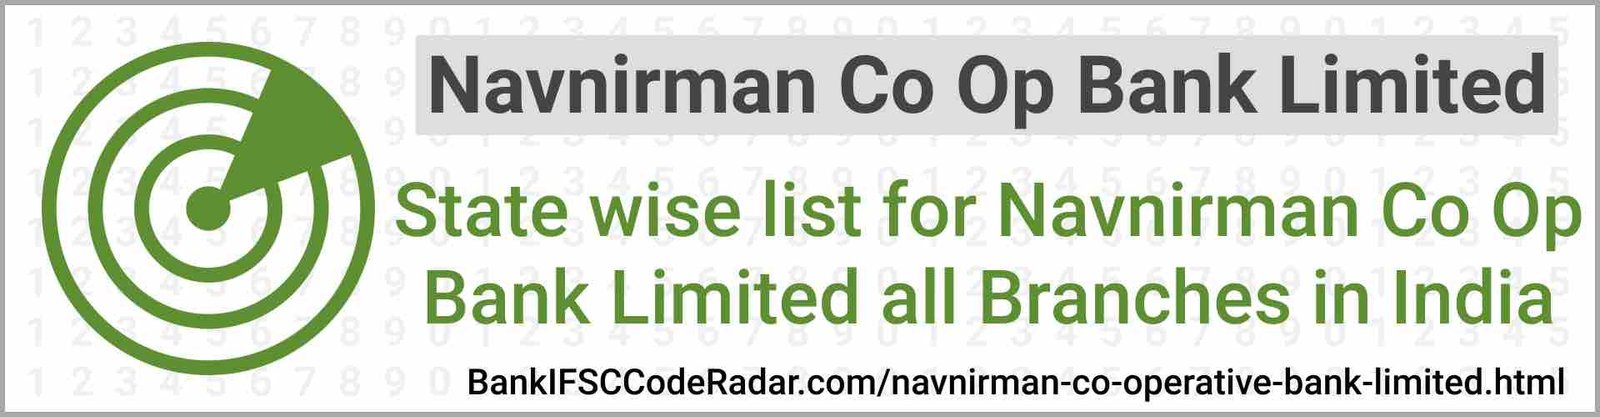 Navnirman Co Operative Bank Limited All Branches India